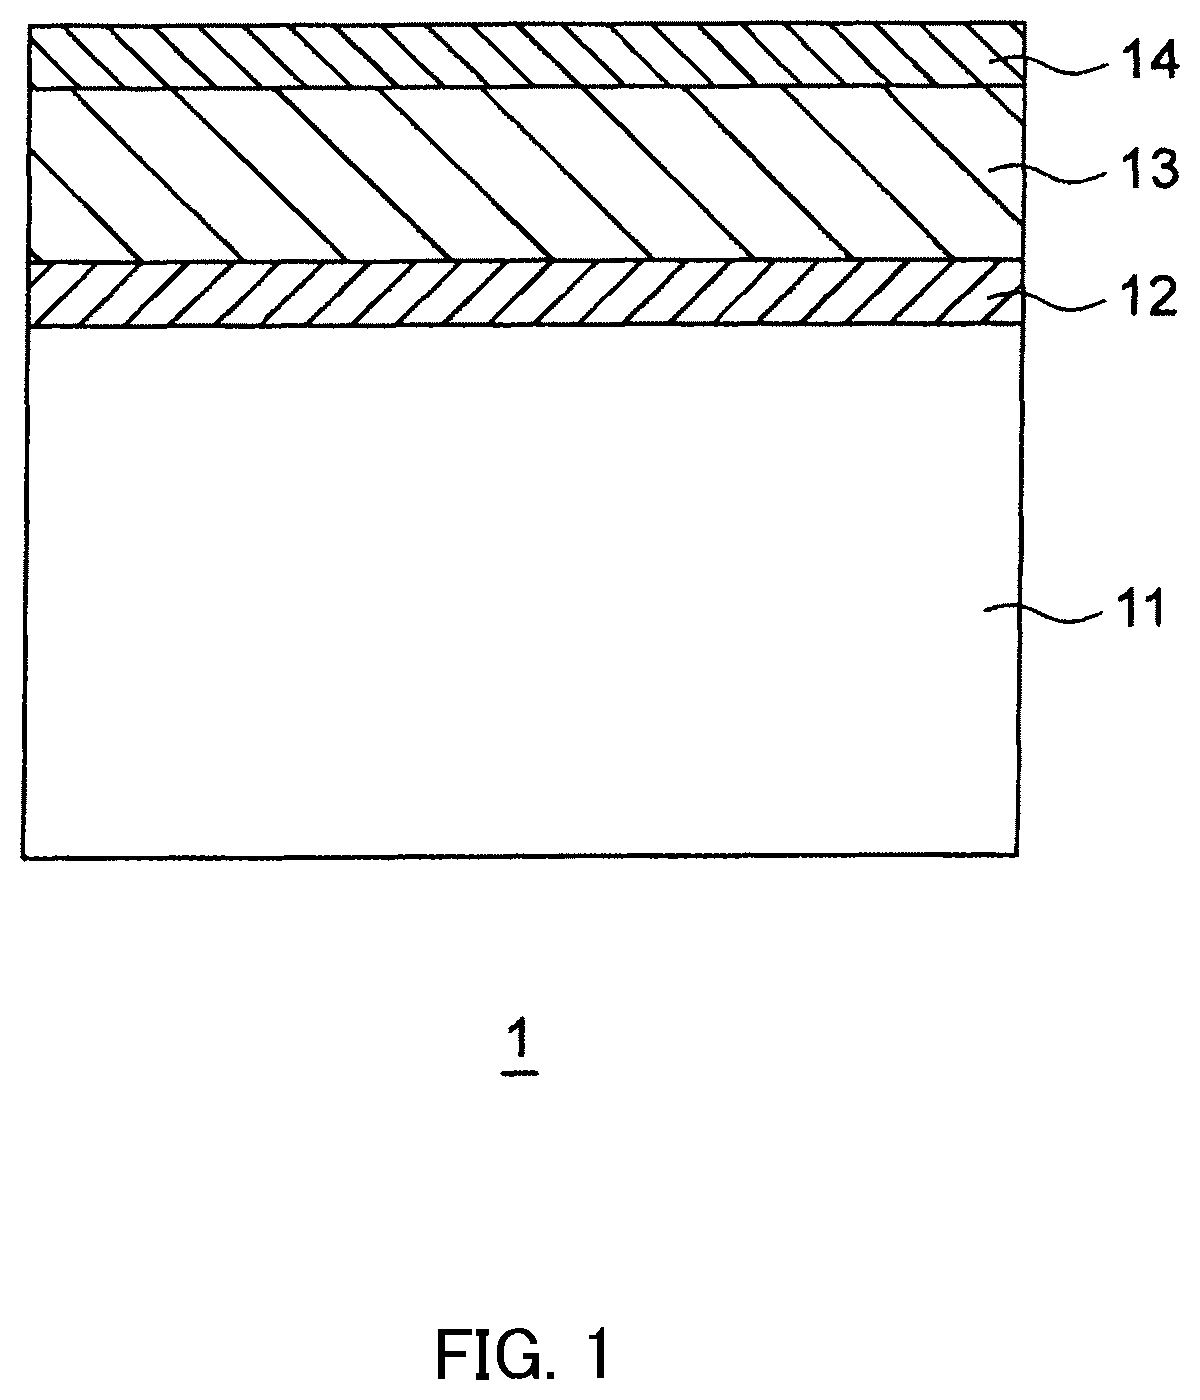 Polycrystalline dielectric thin film and capacitance element